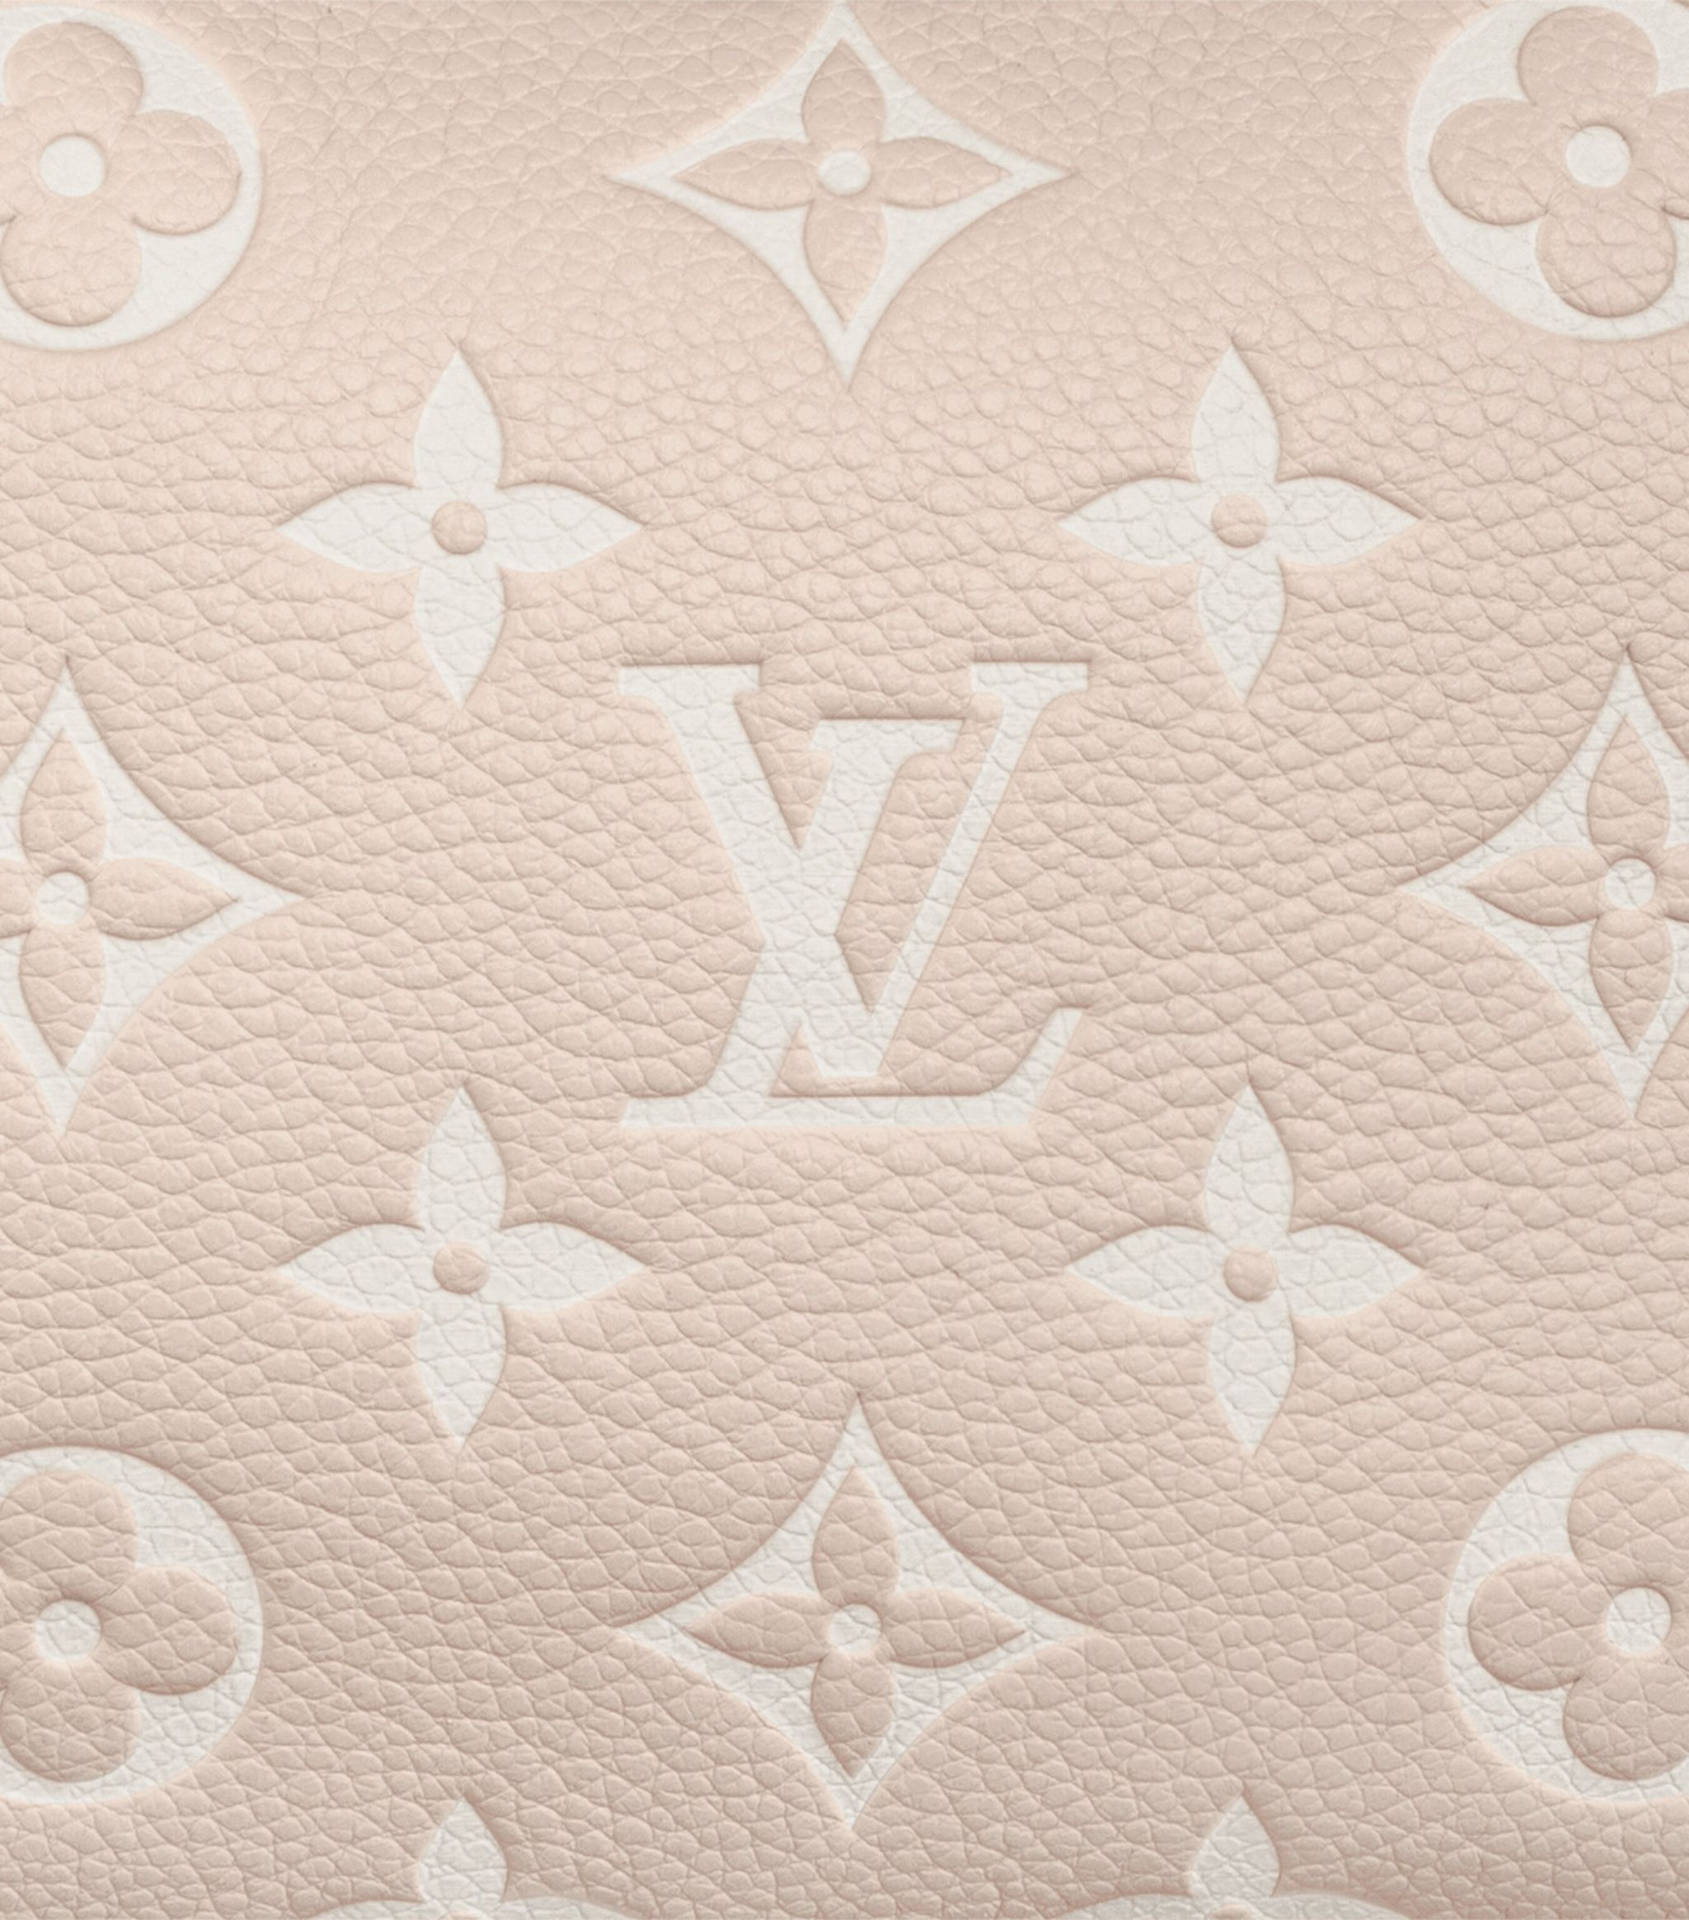 Download Classy, Timeless Iconic Louis Vuitton Aesthetic Wallpaper